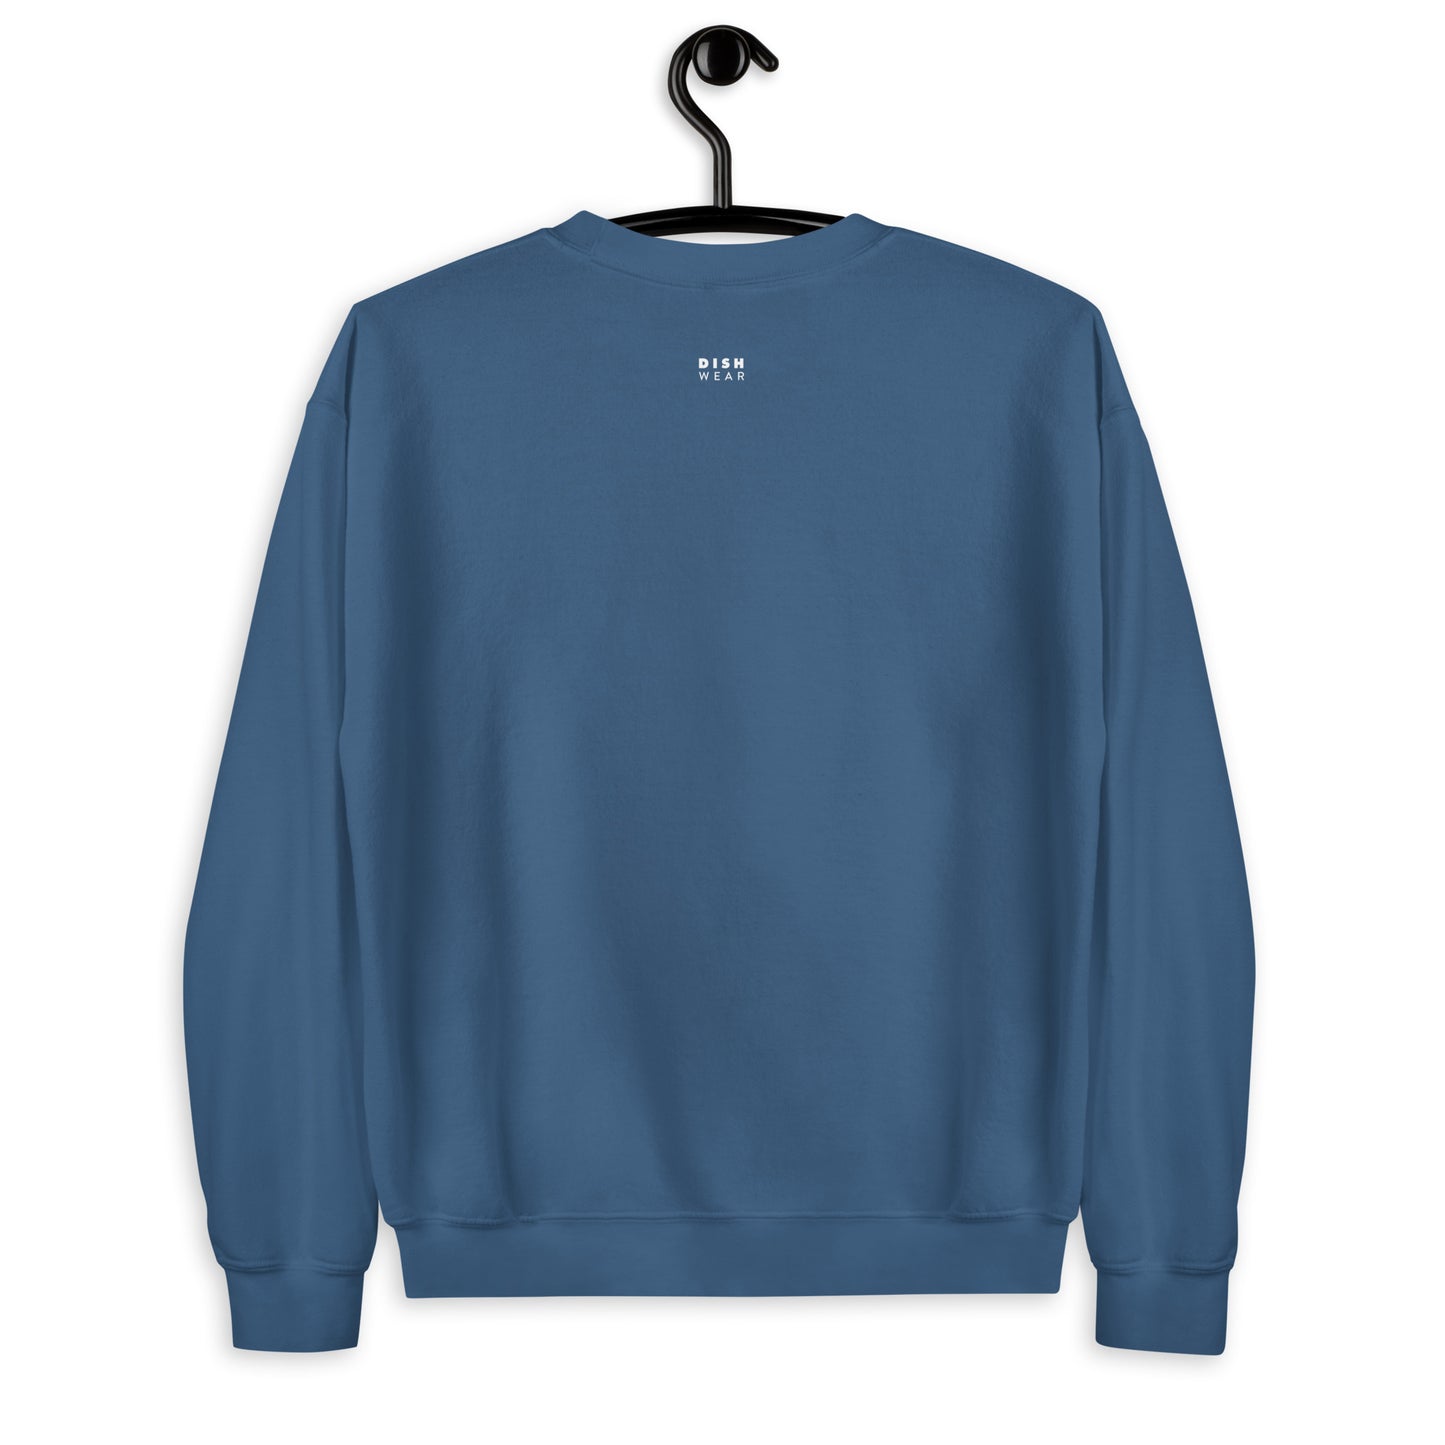 Blue Cheese Sweatshirt - Arched Font